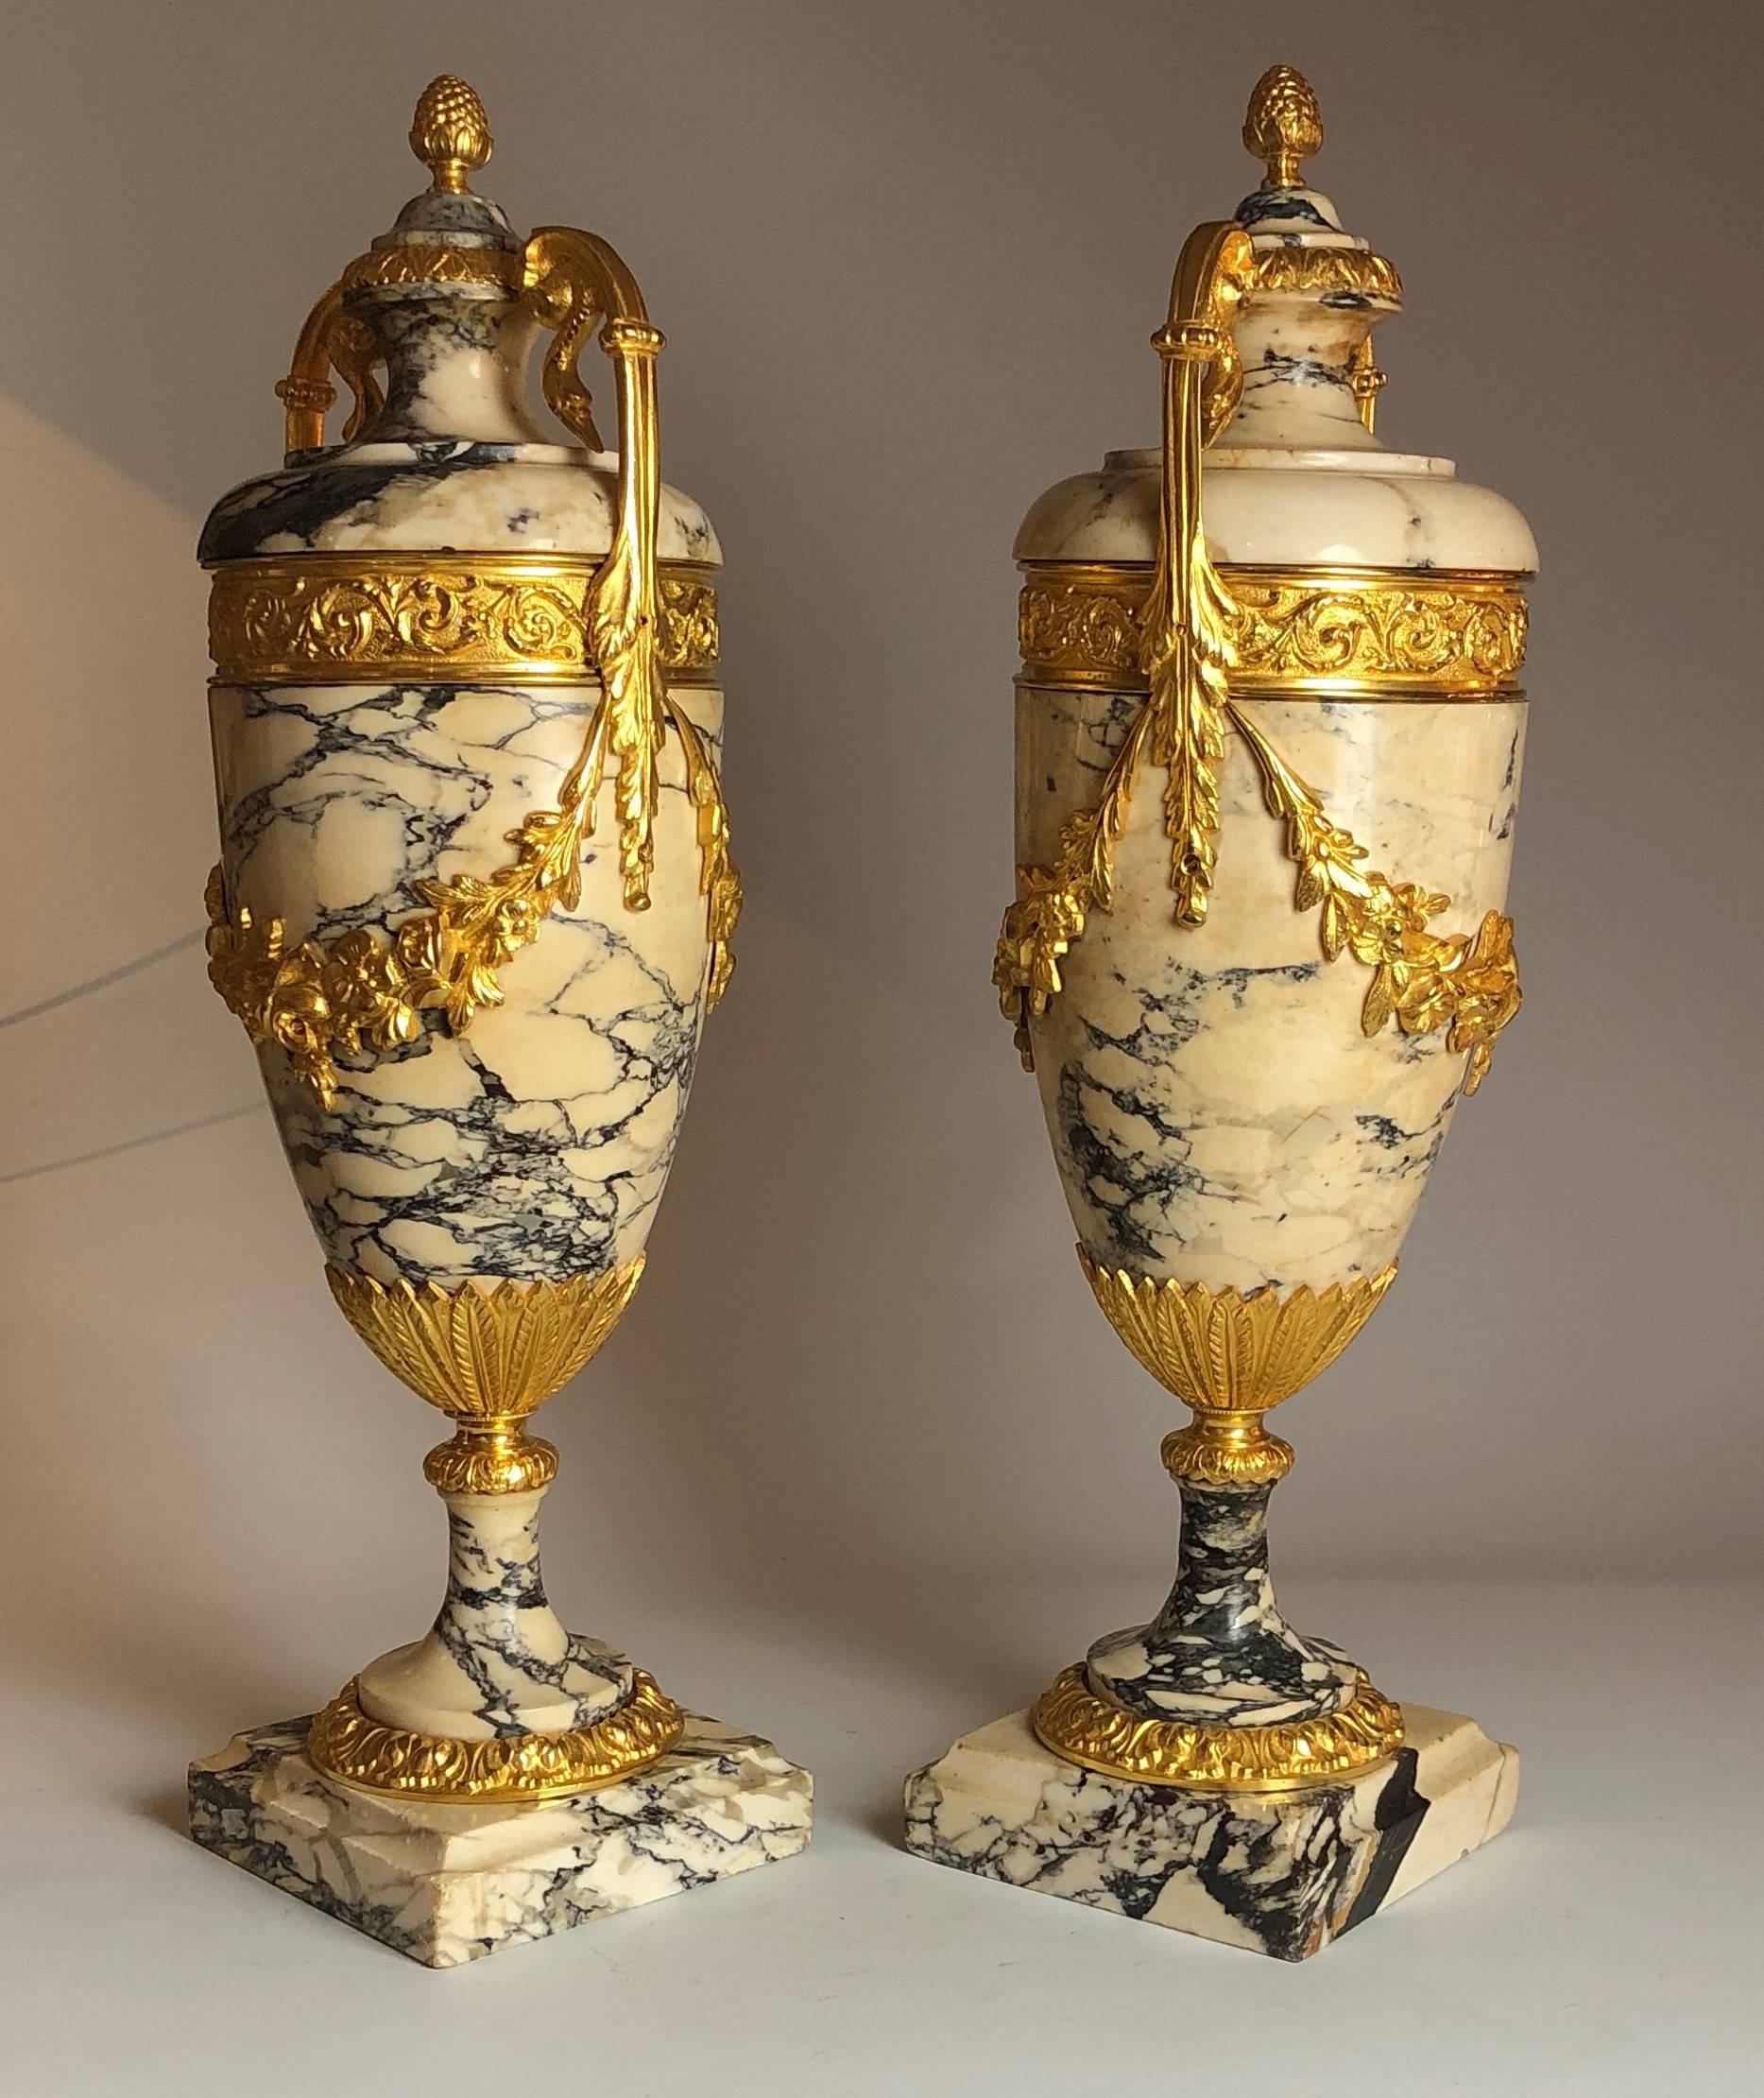 Empire Revival Antique Pair of Ormolu-Mounted Marble Urns, French, circa 1870